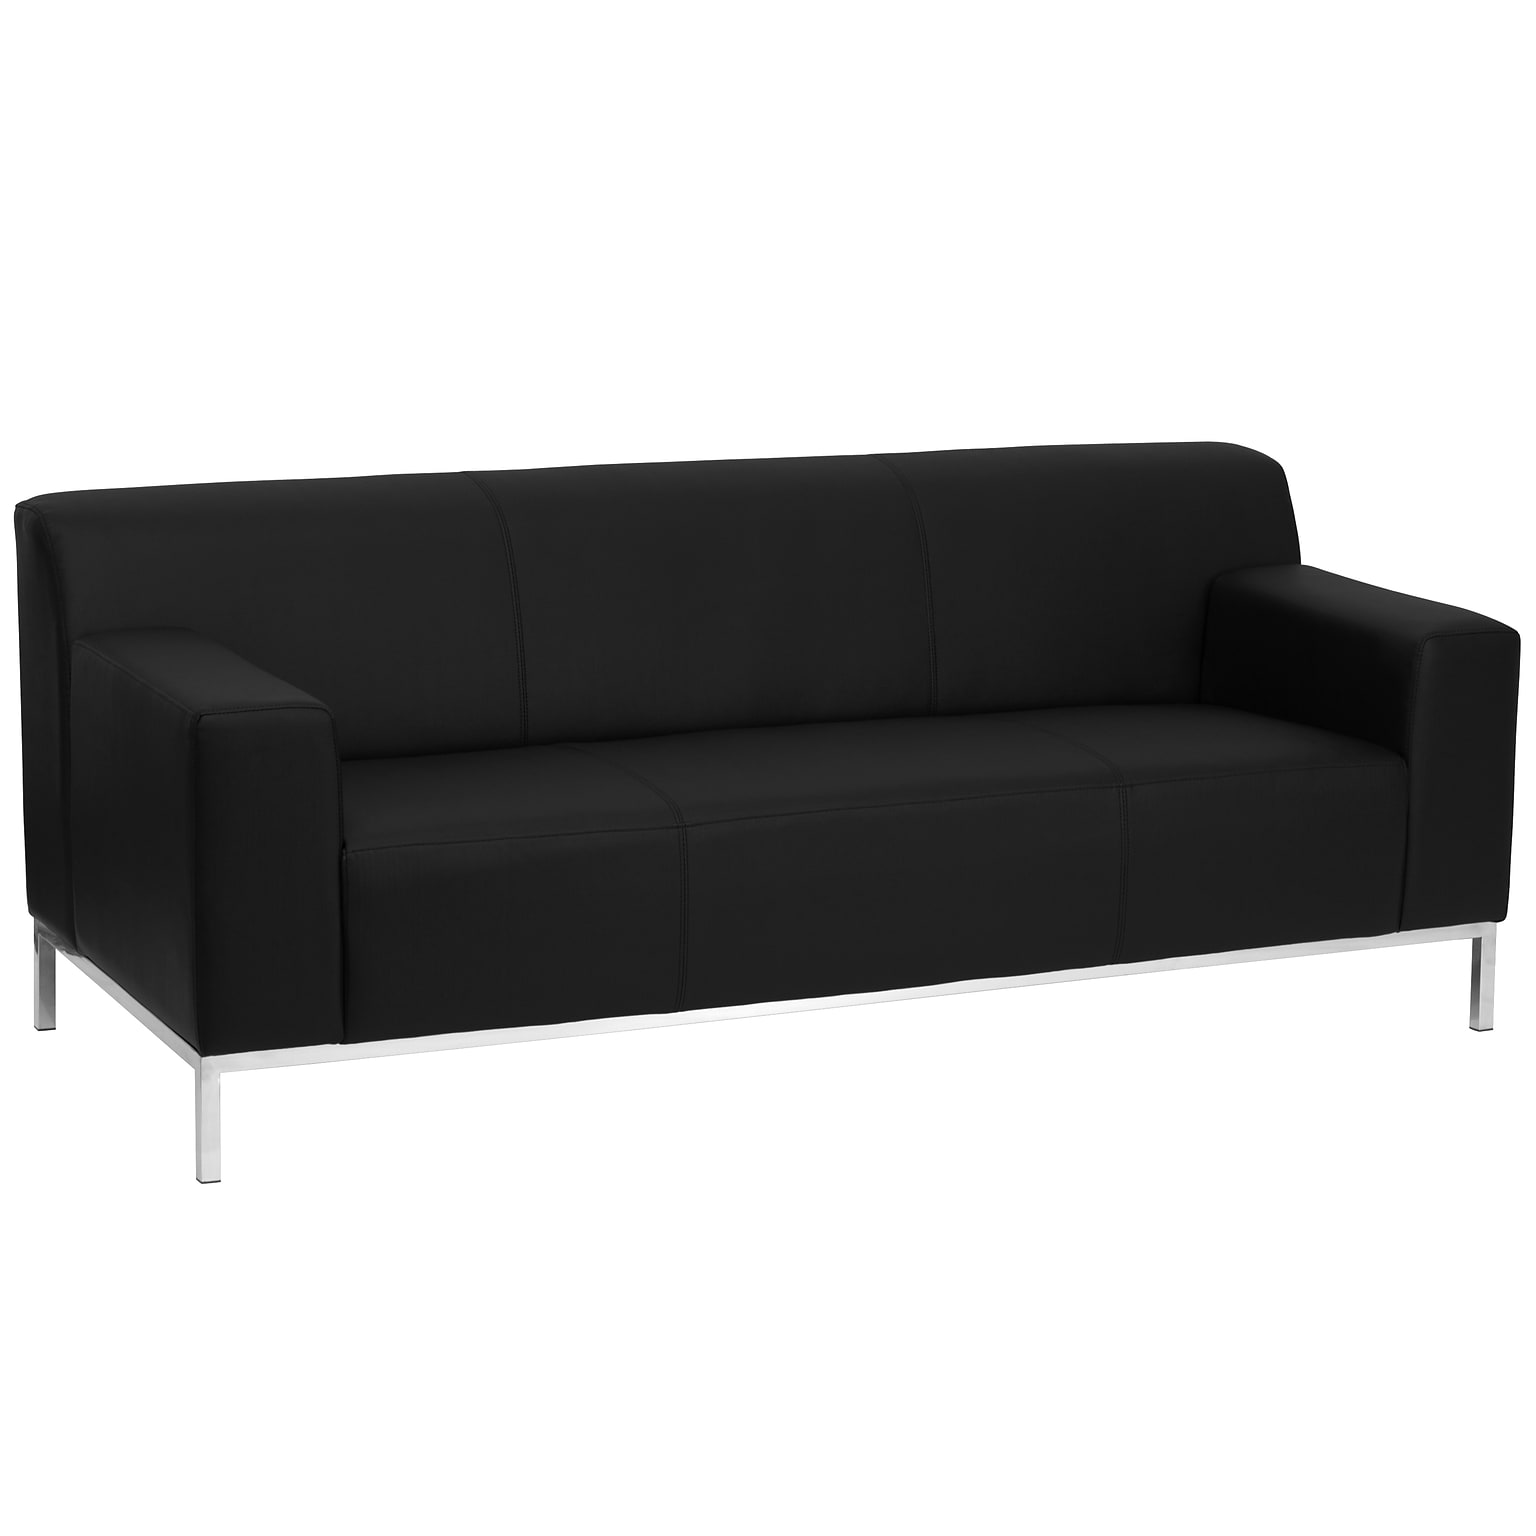 Flash Furniture HERCULES Definity Series 75.25 LeatherSoft Sofa with Stainless Steel Frame, Black (ZBDEFNTY809SOBK)